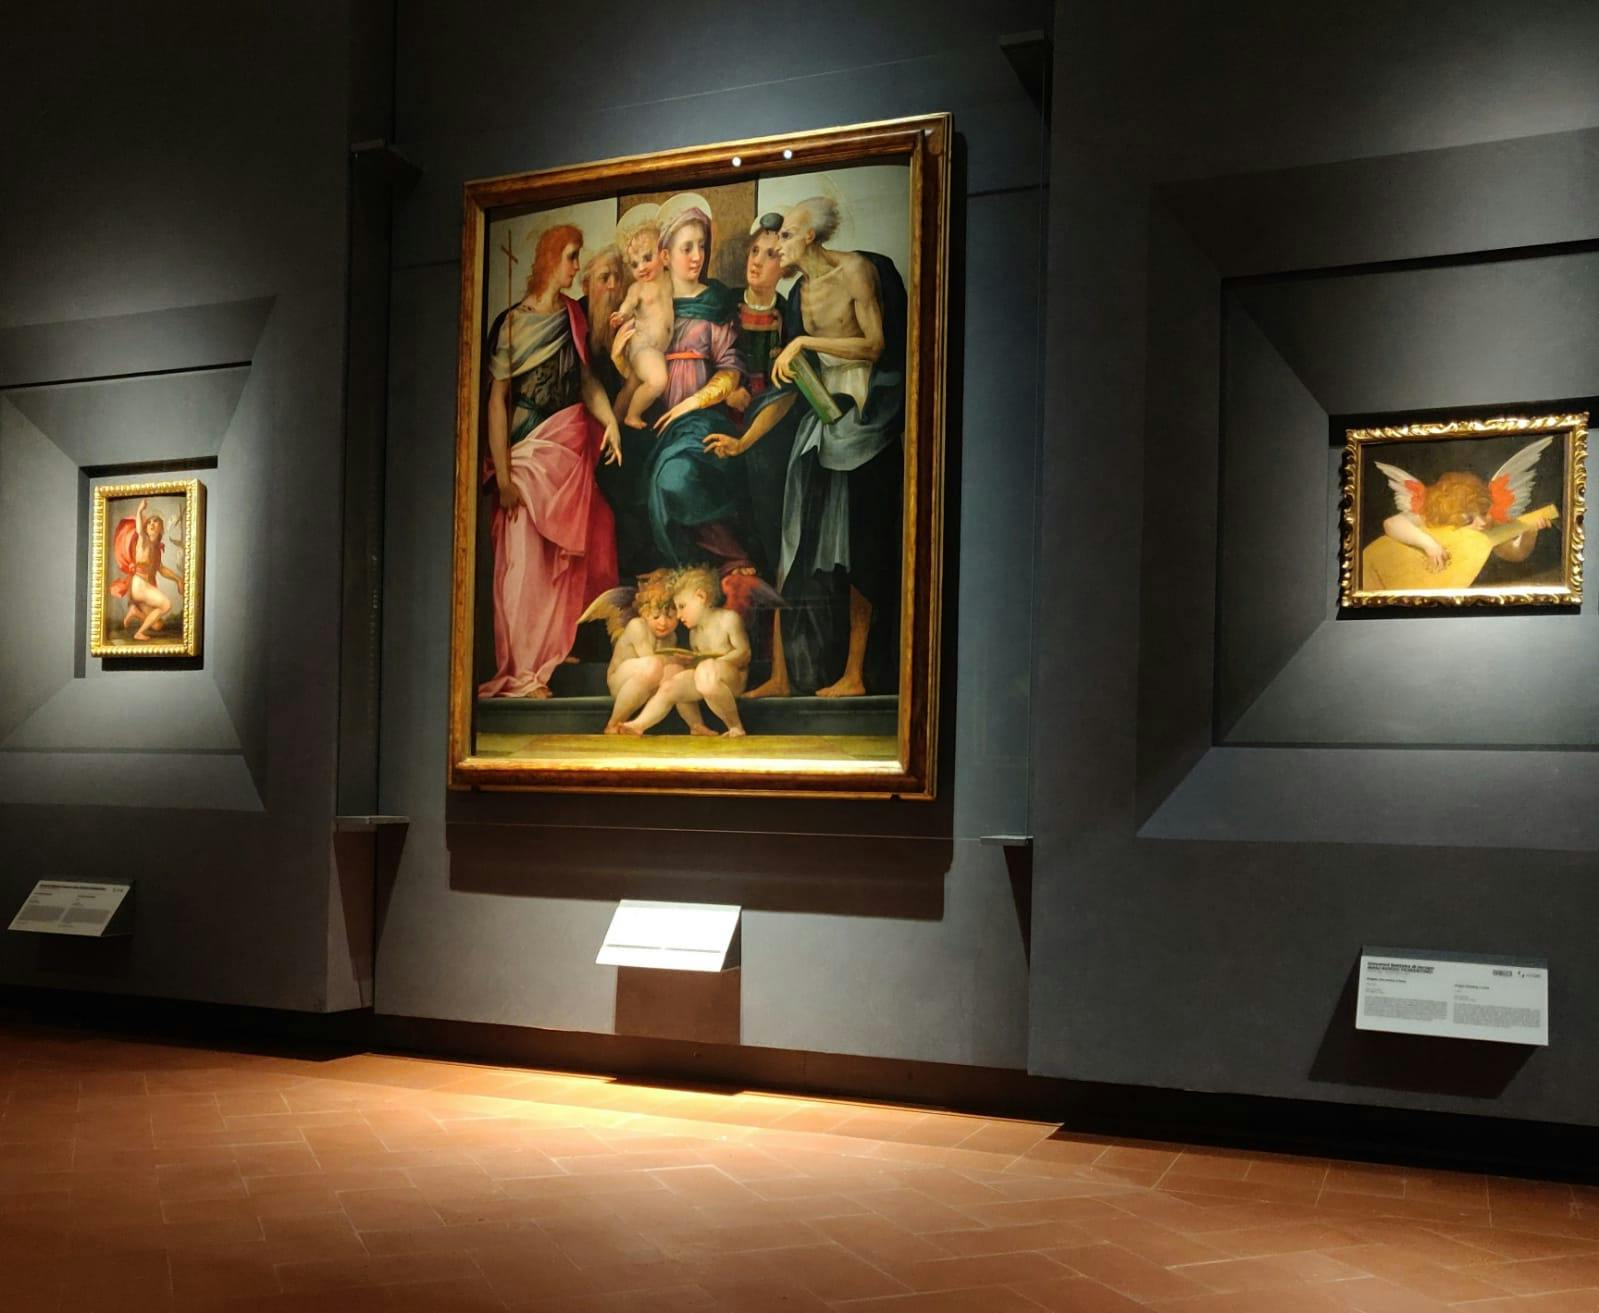 The Uffizi reopens with 16th-century masterpieces on display for the first time